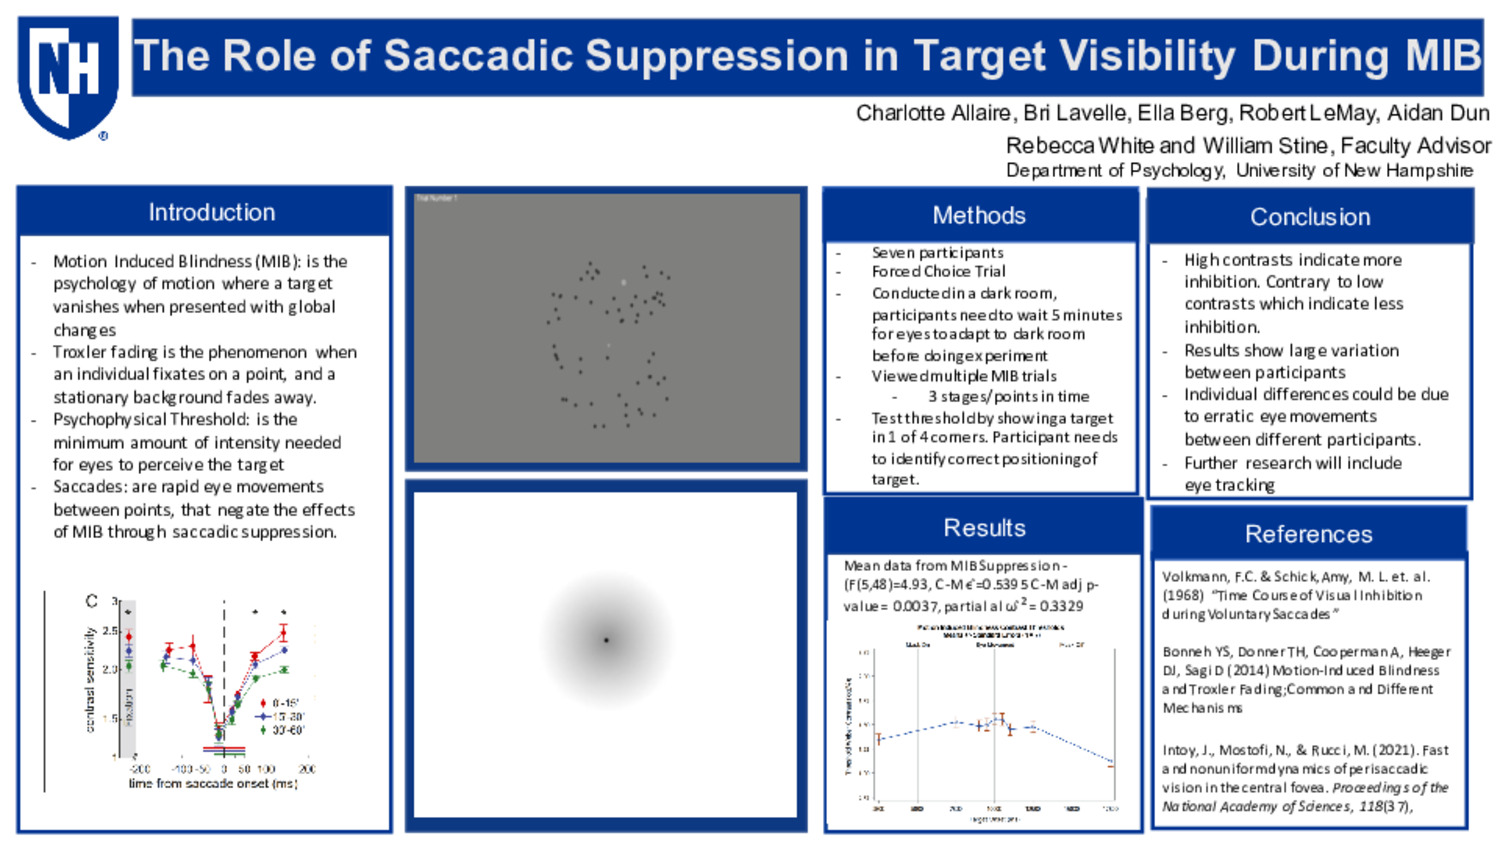 The Role Of Saccadic Suppression In Target Visibility During Motion Induced Blindness by cva1003